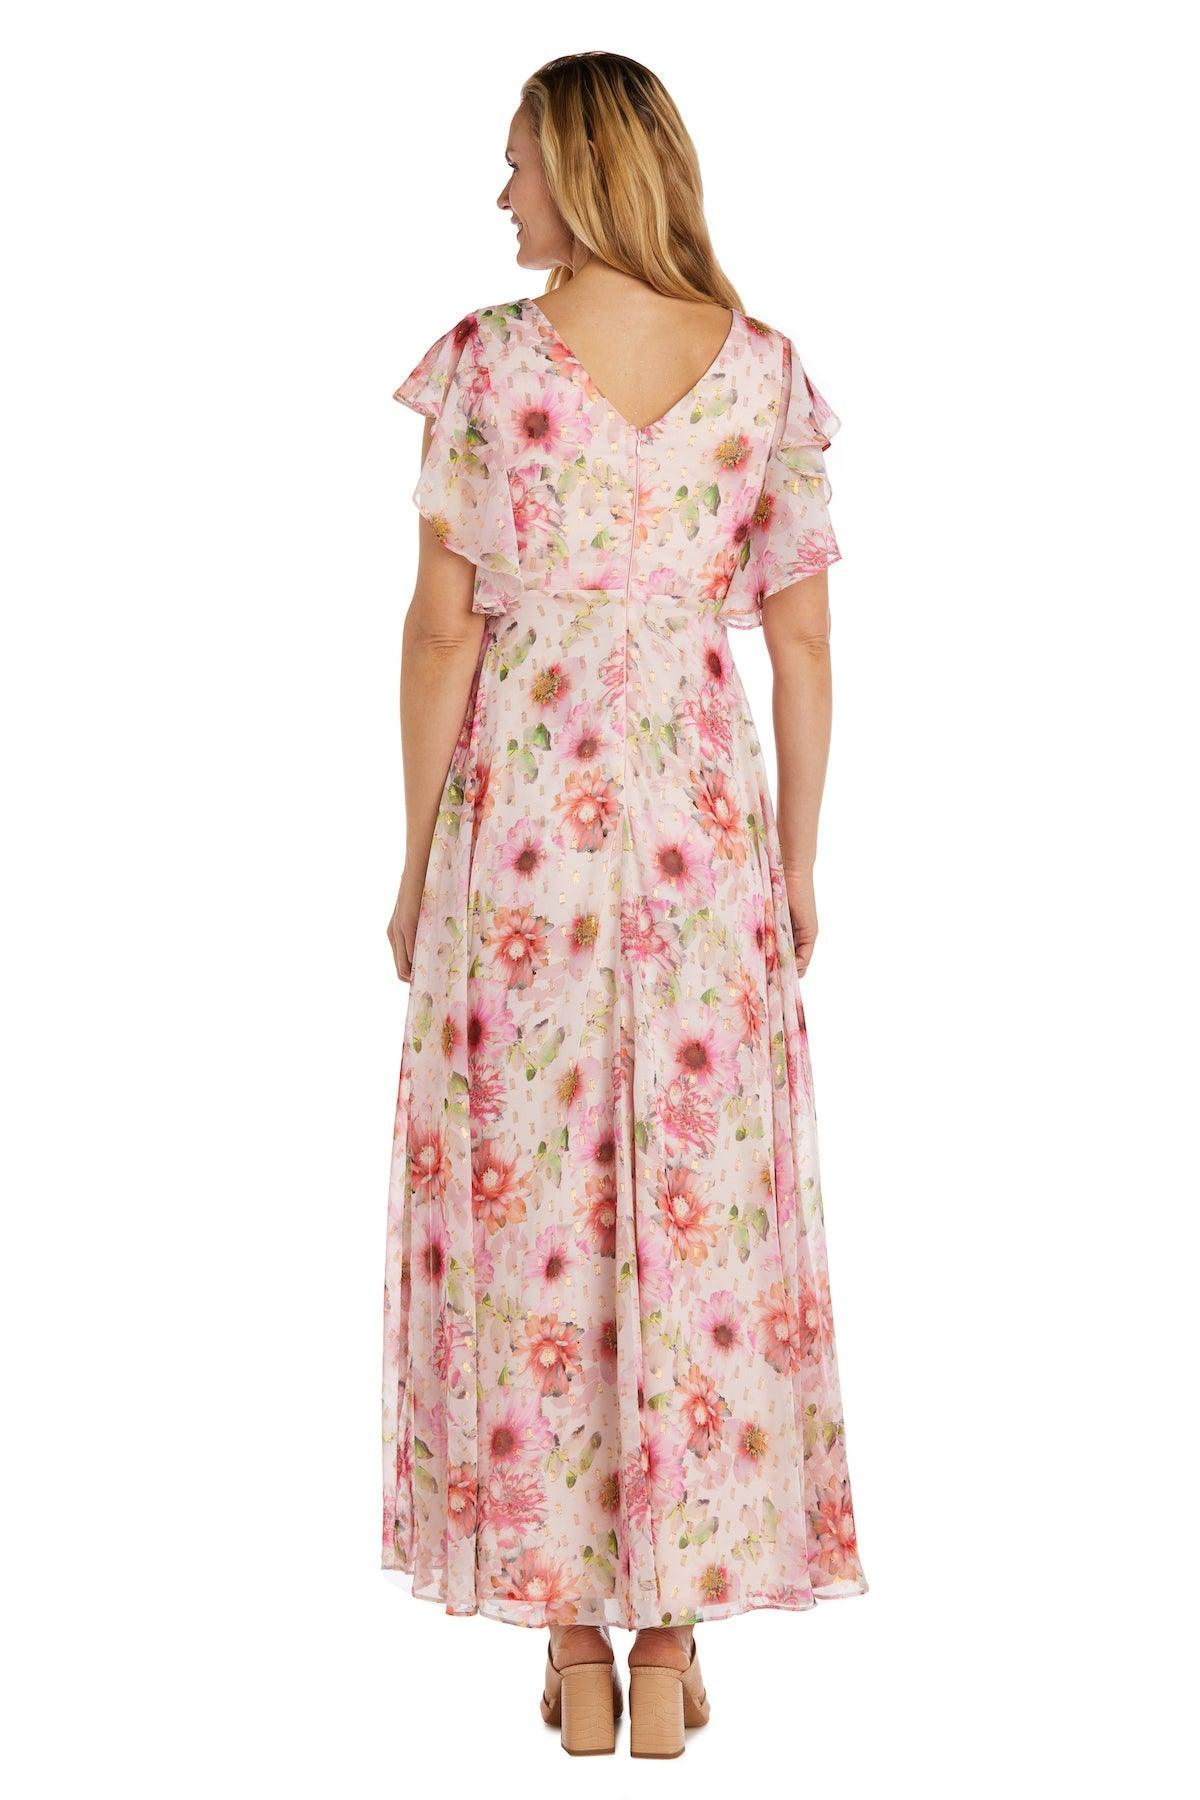 Nightway Long Sleeveless Floral Maxi Dress 22140 - The Dress Outlet